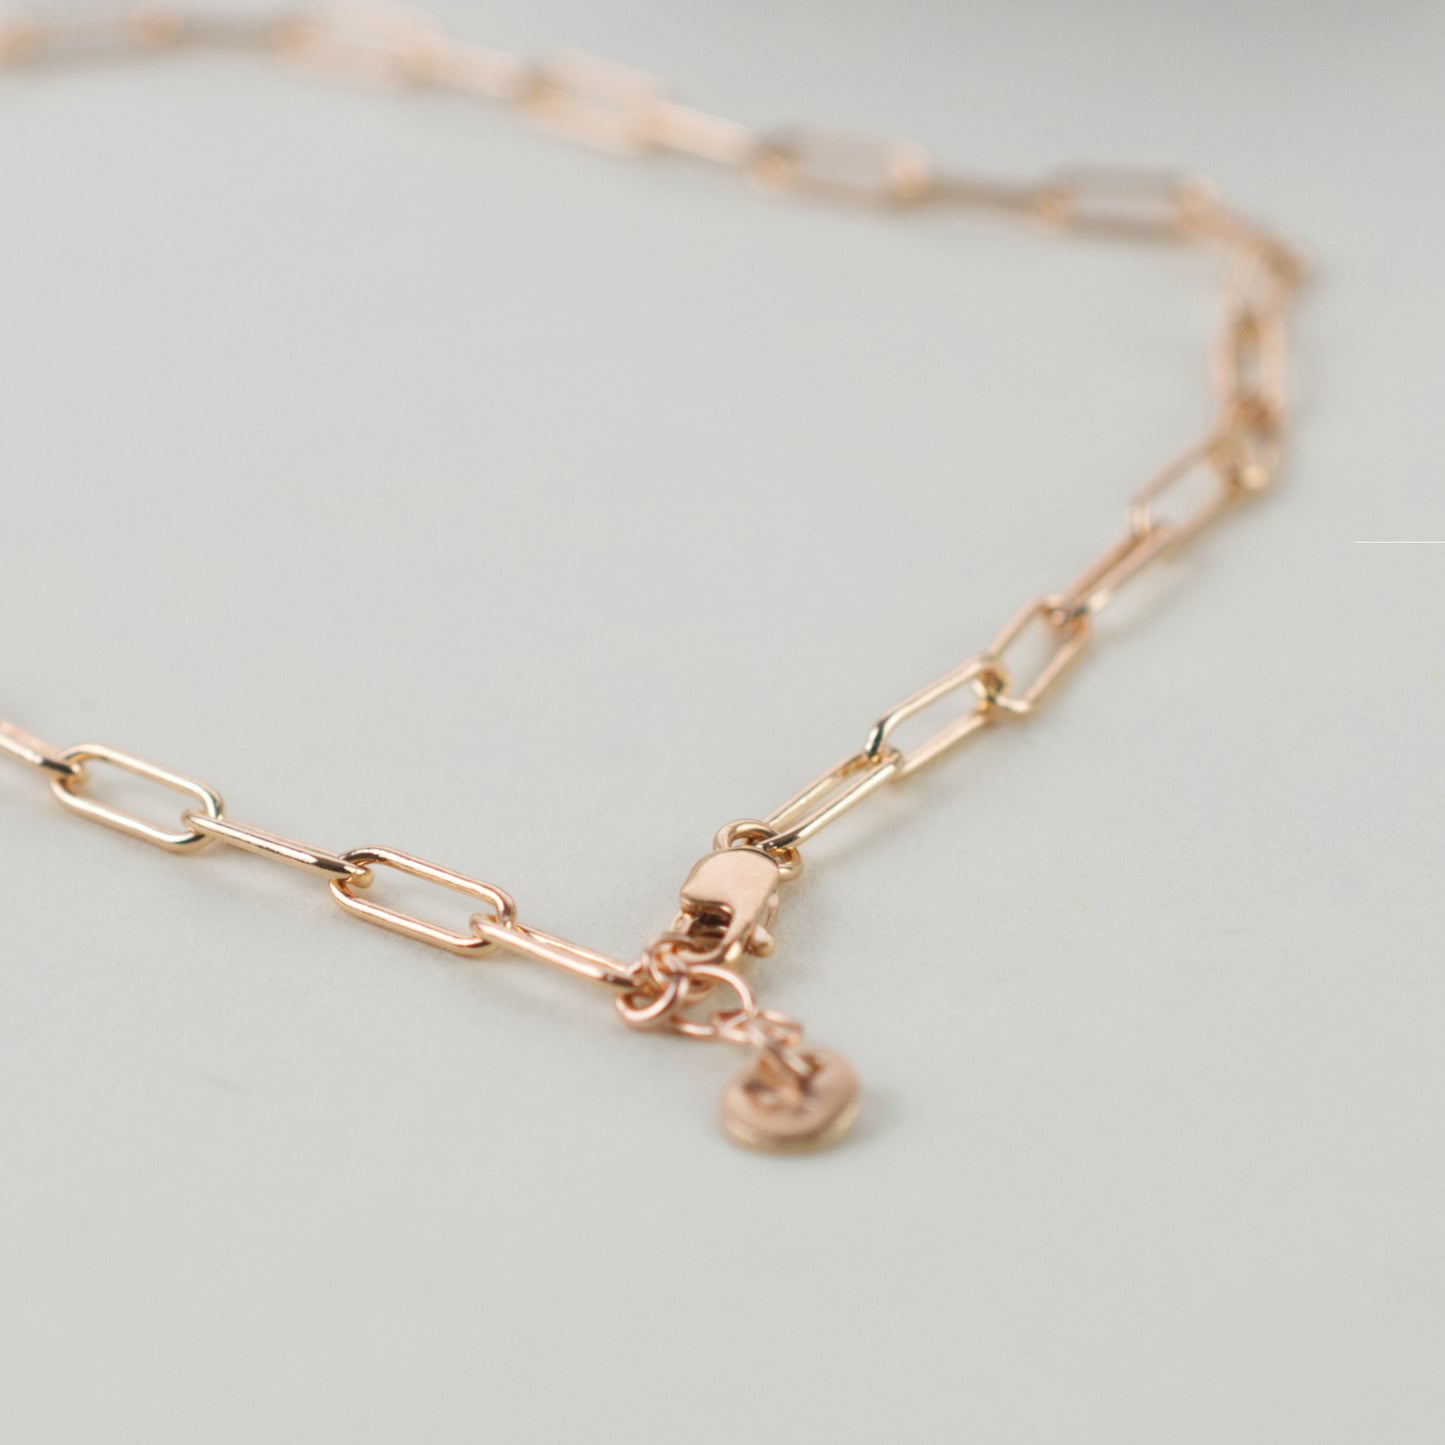 14K Rose Gold Fill Paperclip Chain Necklace with a lobster clasp and a 3 ring adjustable closure